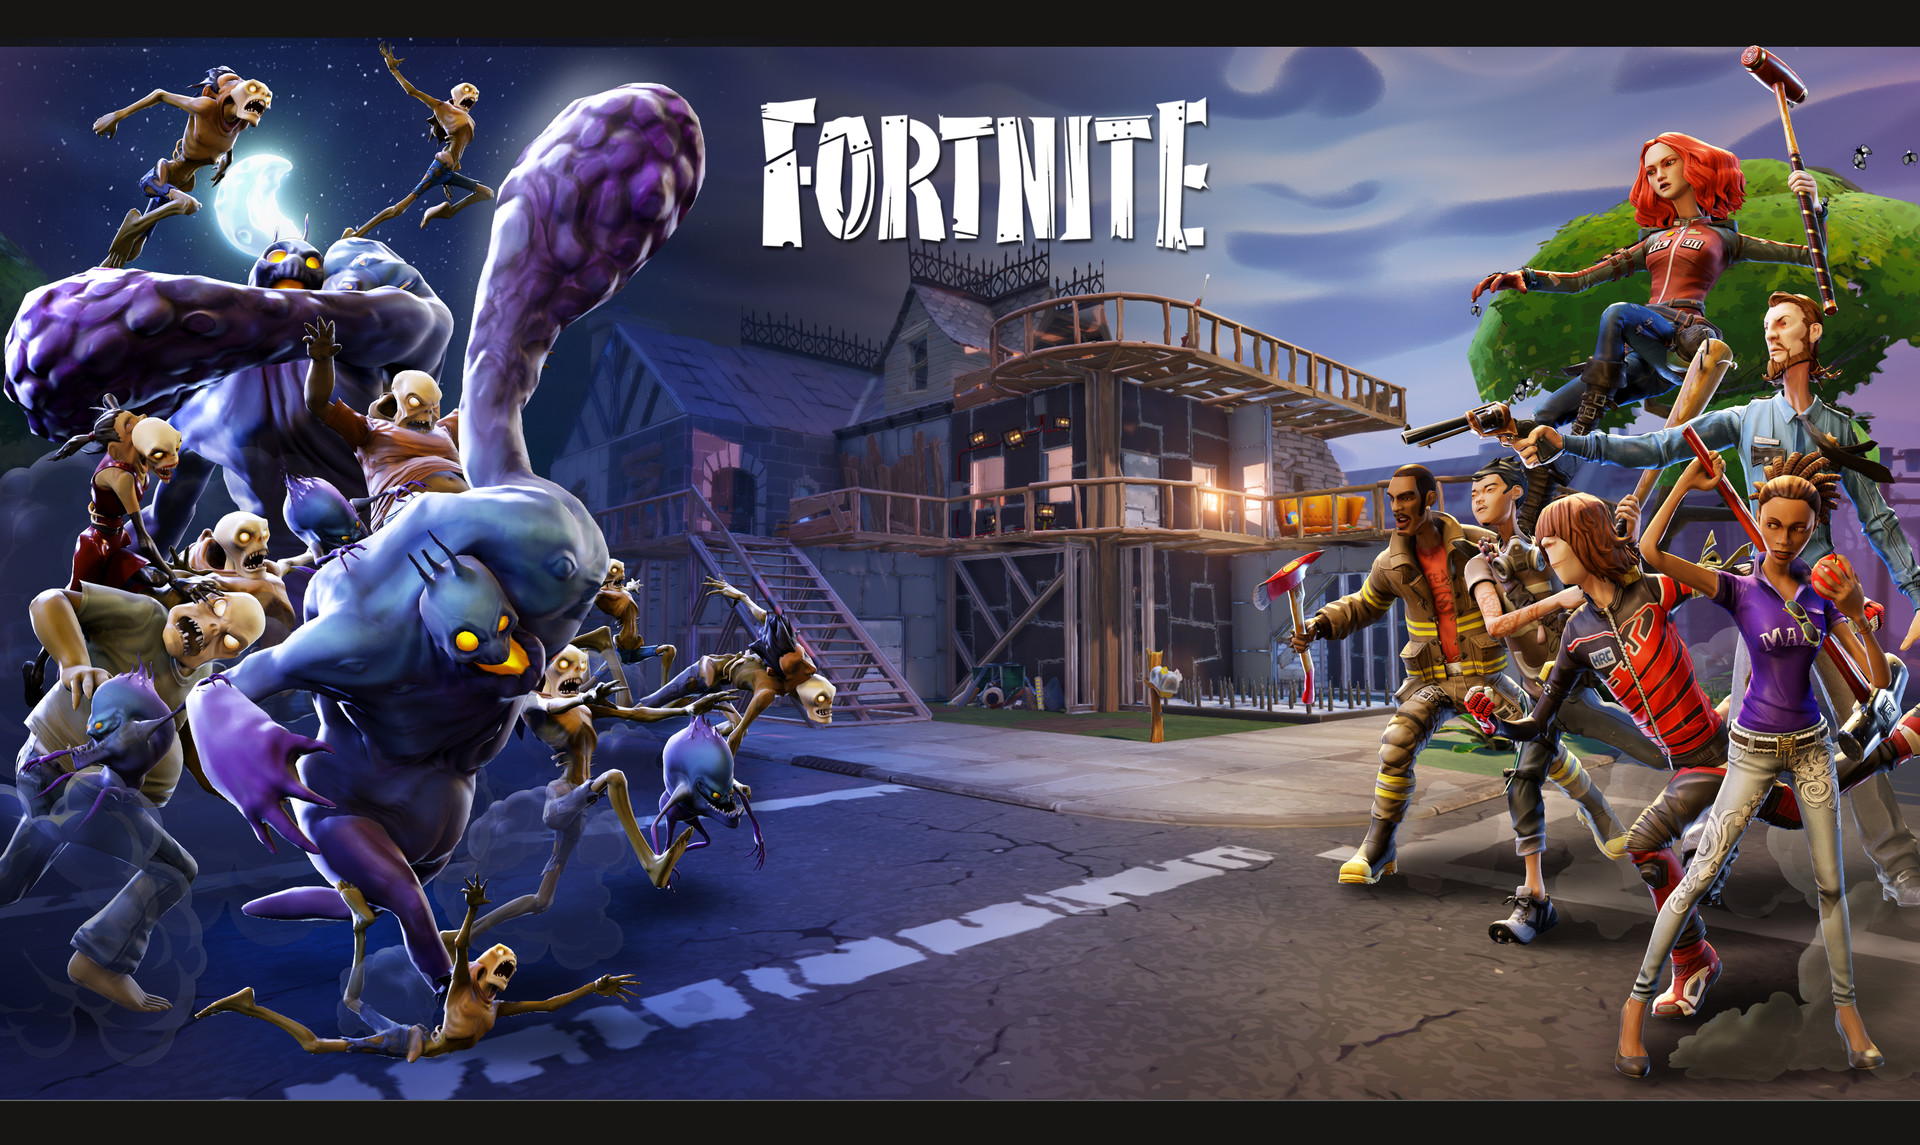 Royale Realm fails to beat Fortnite and loses 94% initial users